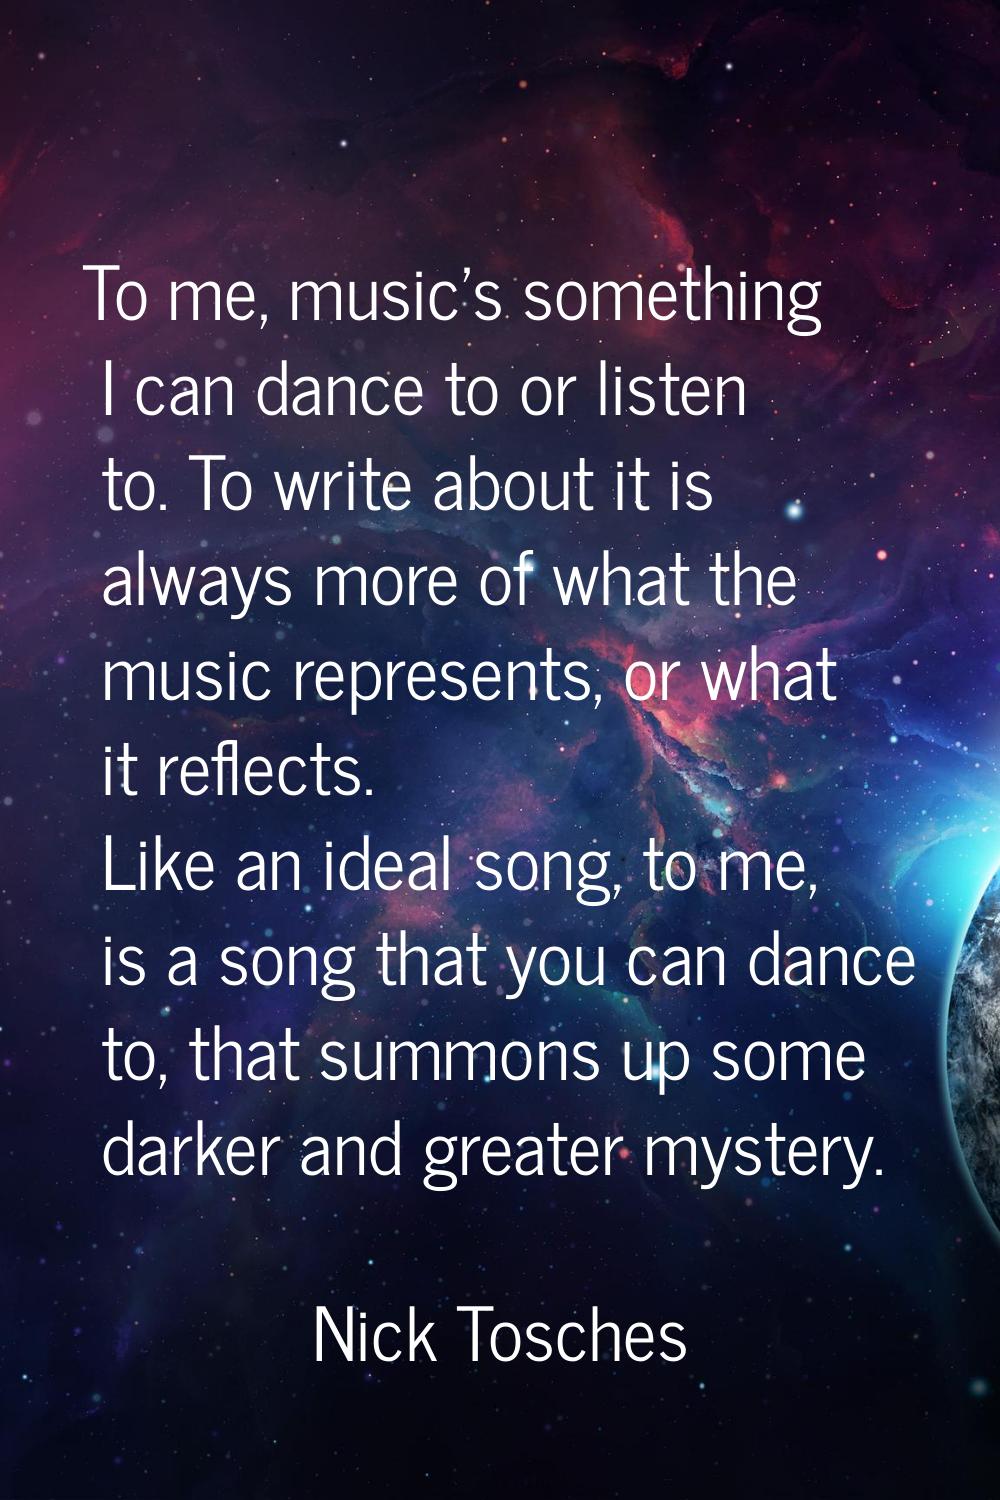 To me, music's something I can dance to or listen to. To write about it is always more of what the 